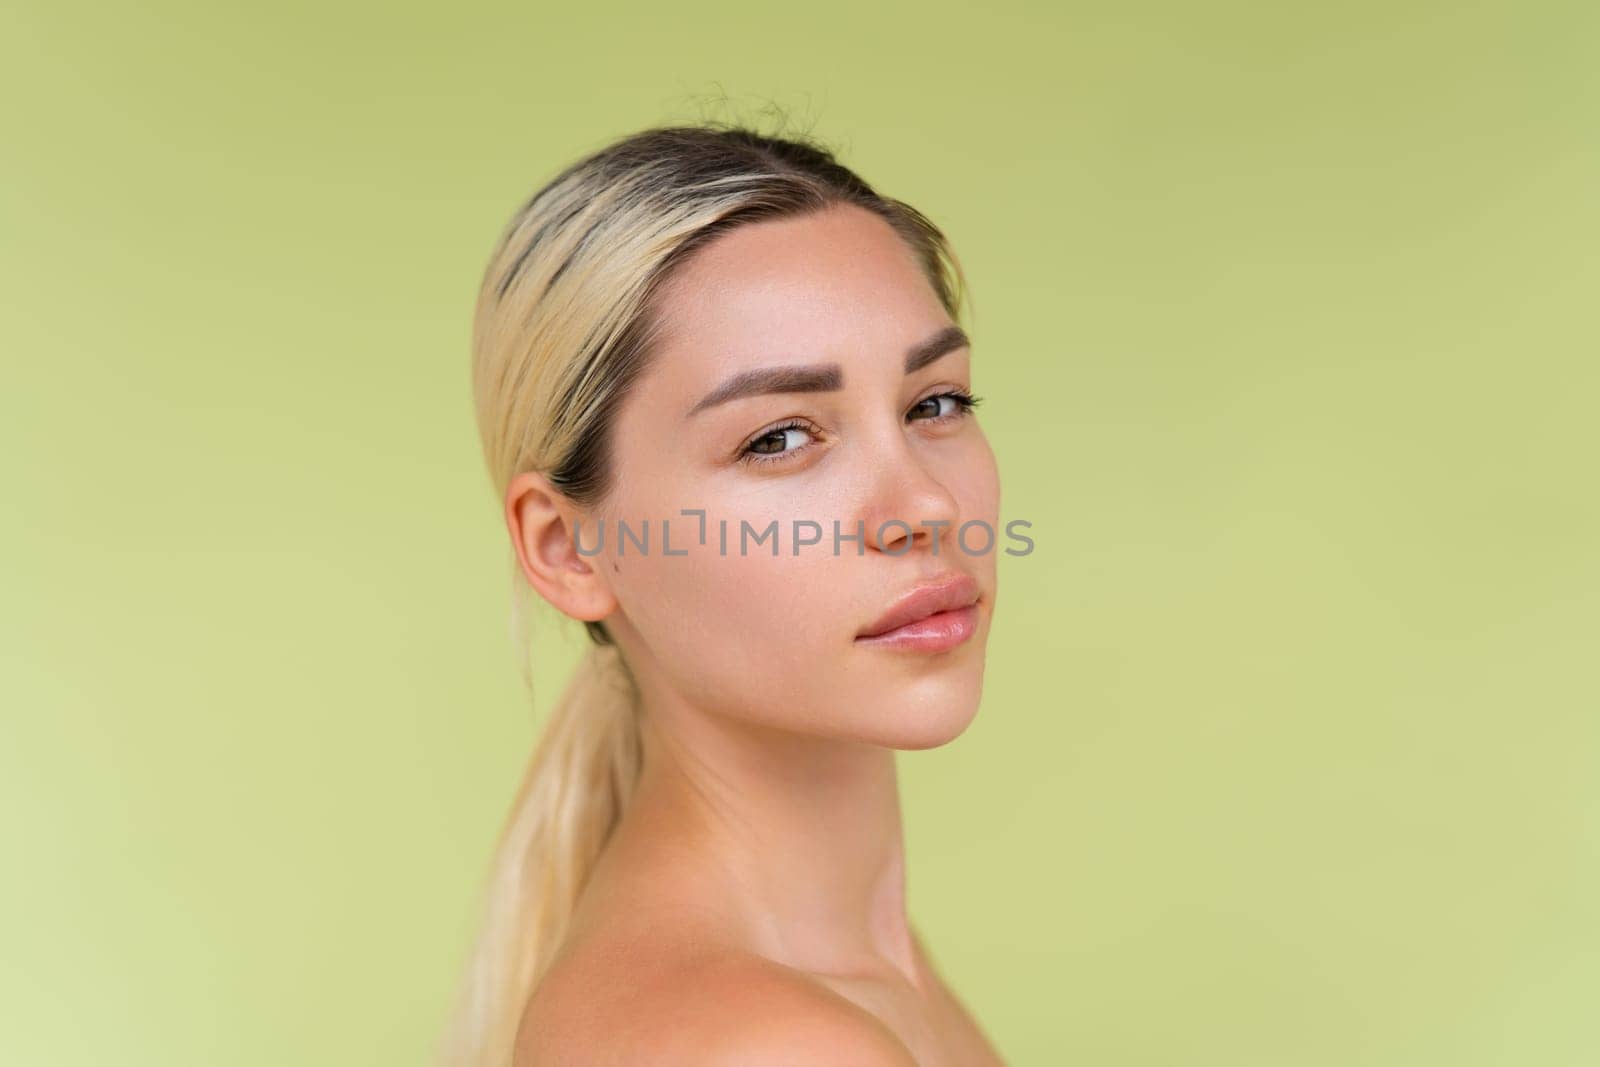 Beauty portrait of young topless woman with bare shoulders on green background with perfect skin and natural makeup